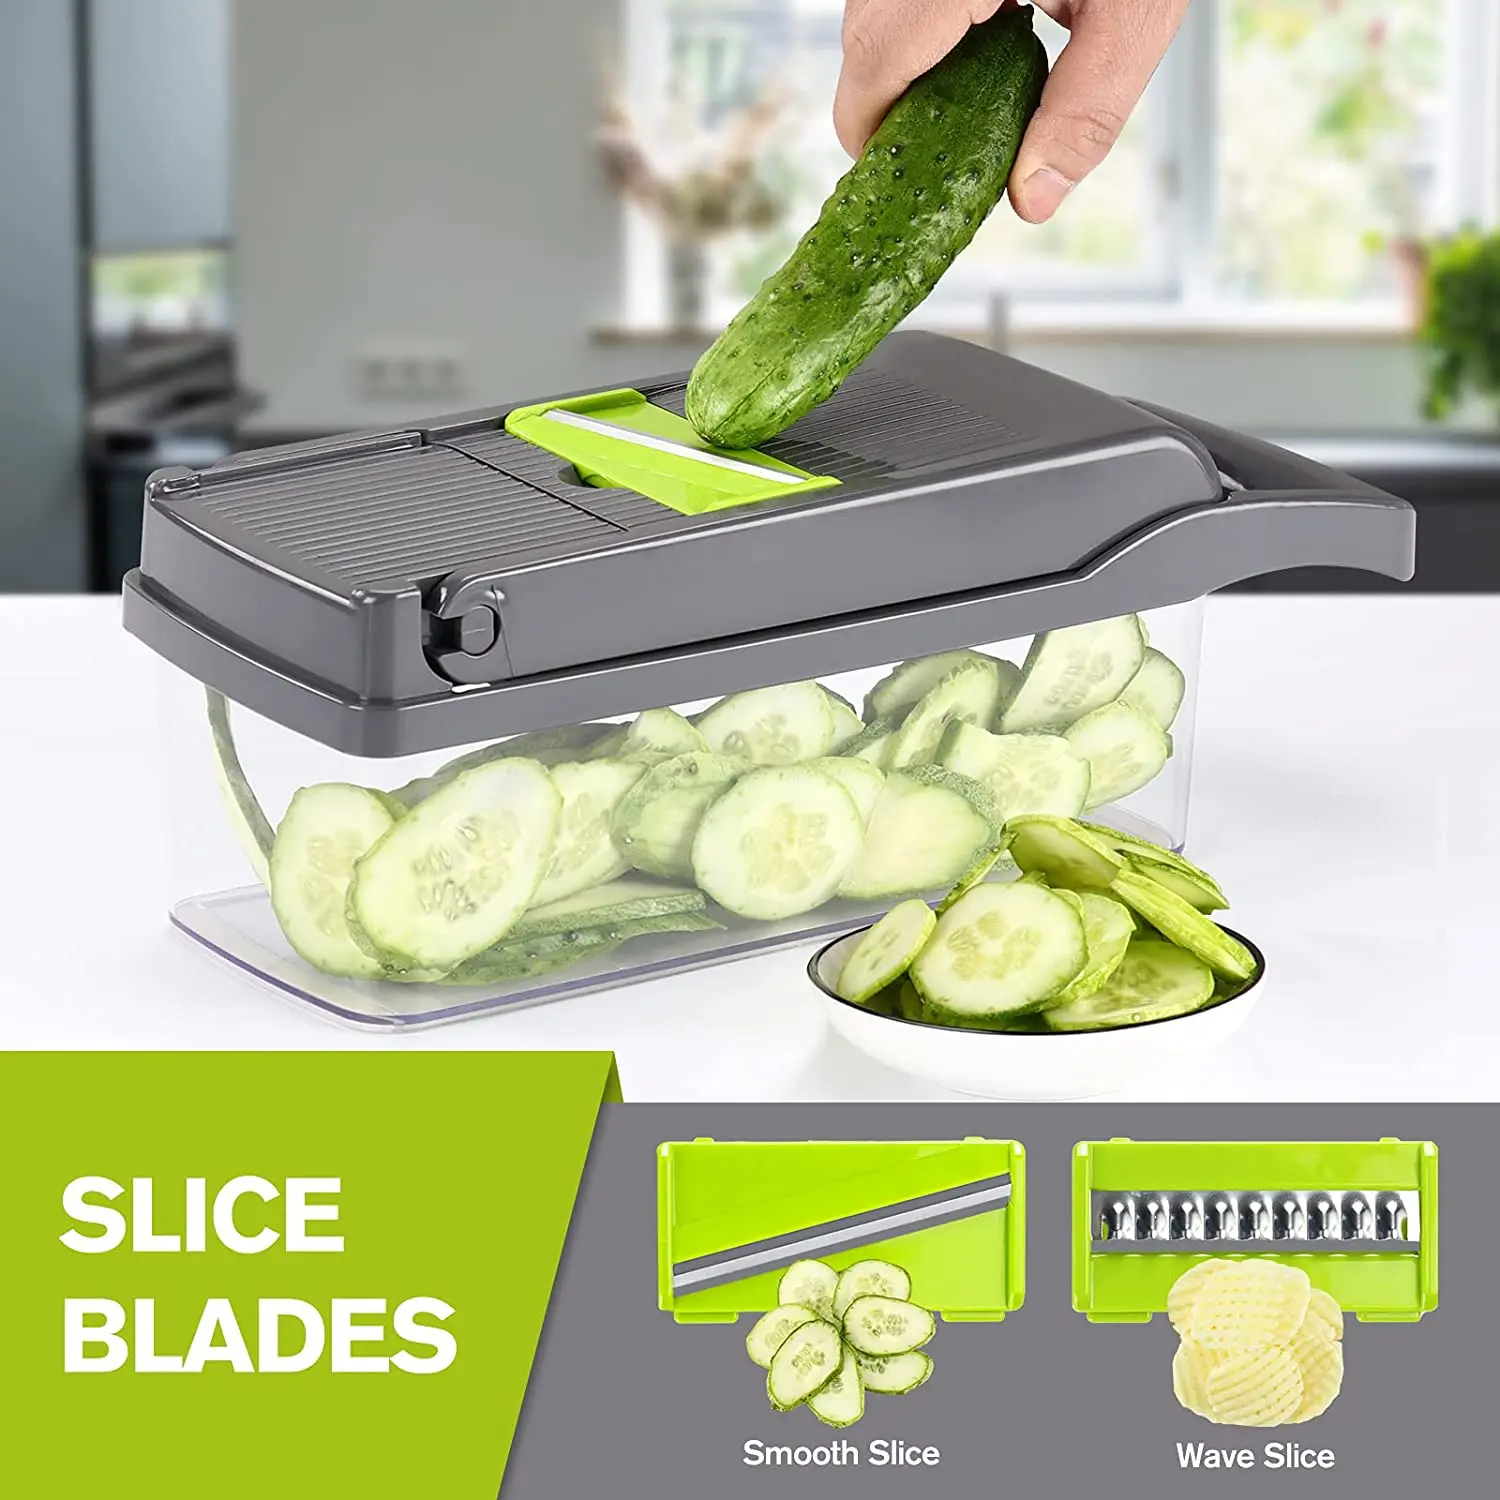 Wholesale Pro-Series10-in-1 Vegetable Chopper, Blade Vegetable Slicer, Onion  Mincer Chopper Cutter Dicer with Container From